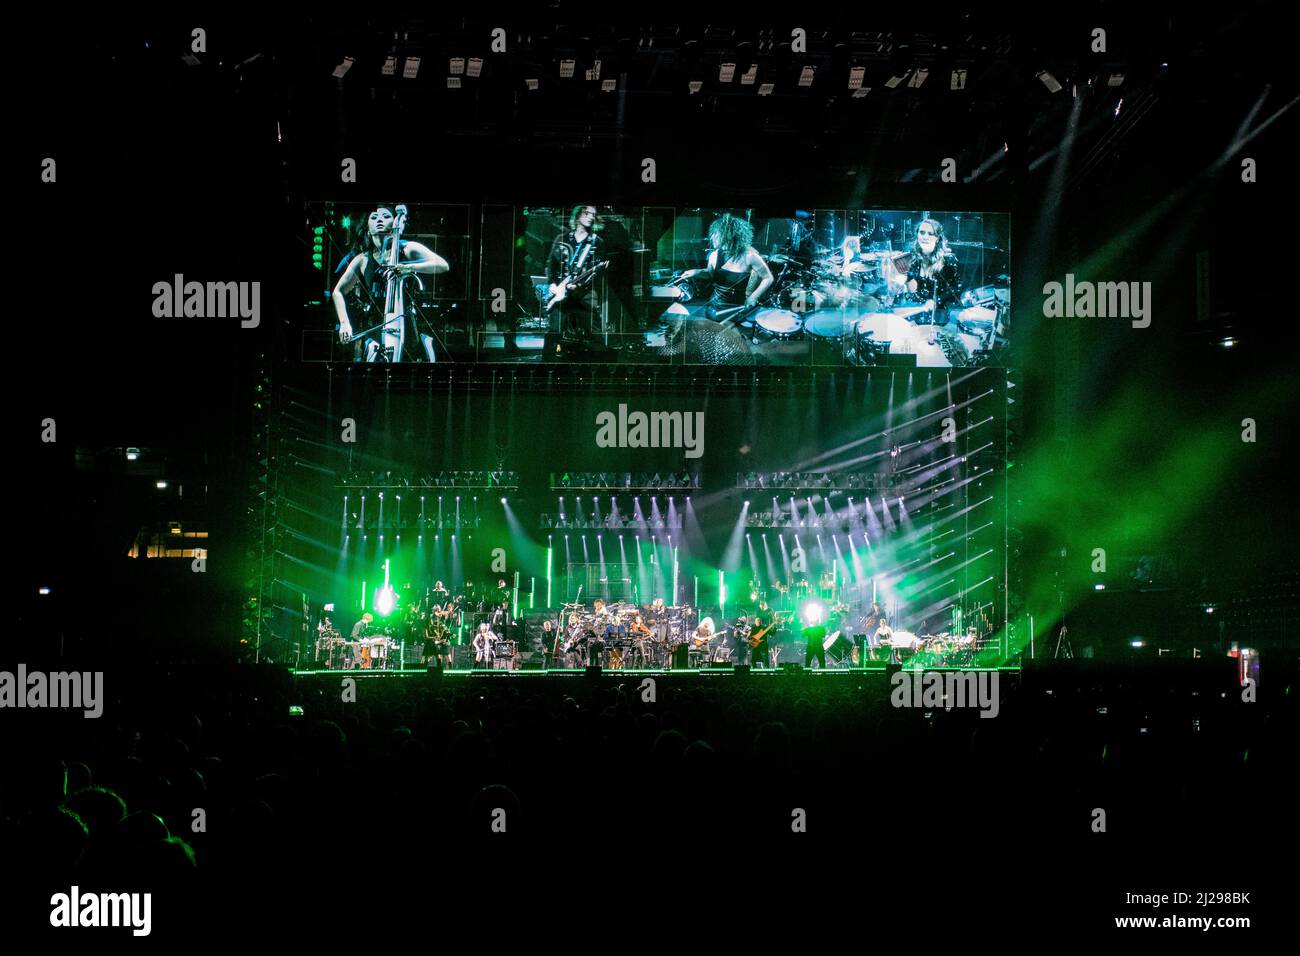 Milan Italy 30 March 2022 Hans Zimmer live at Mediolanum Forum Assago for the live show user colors of Ukraine© Andrea Ripamonti / Alamy Stock Photo